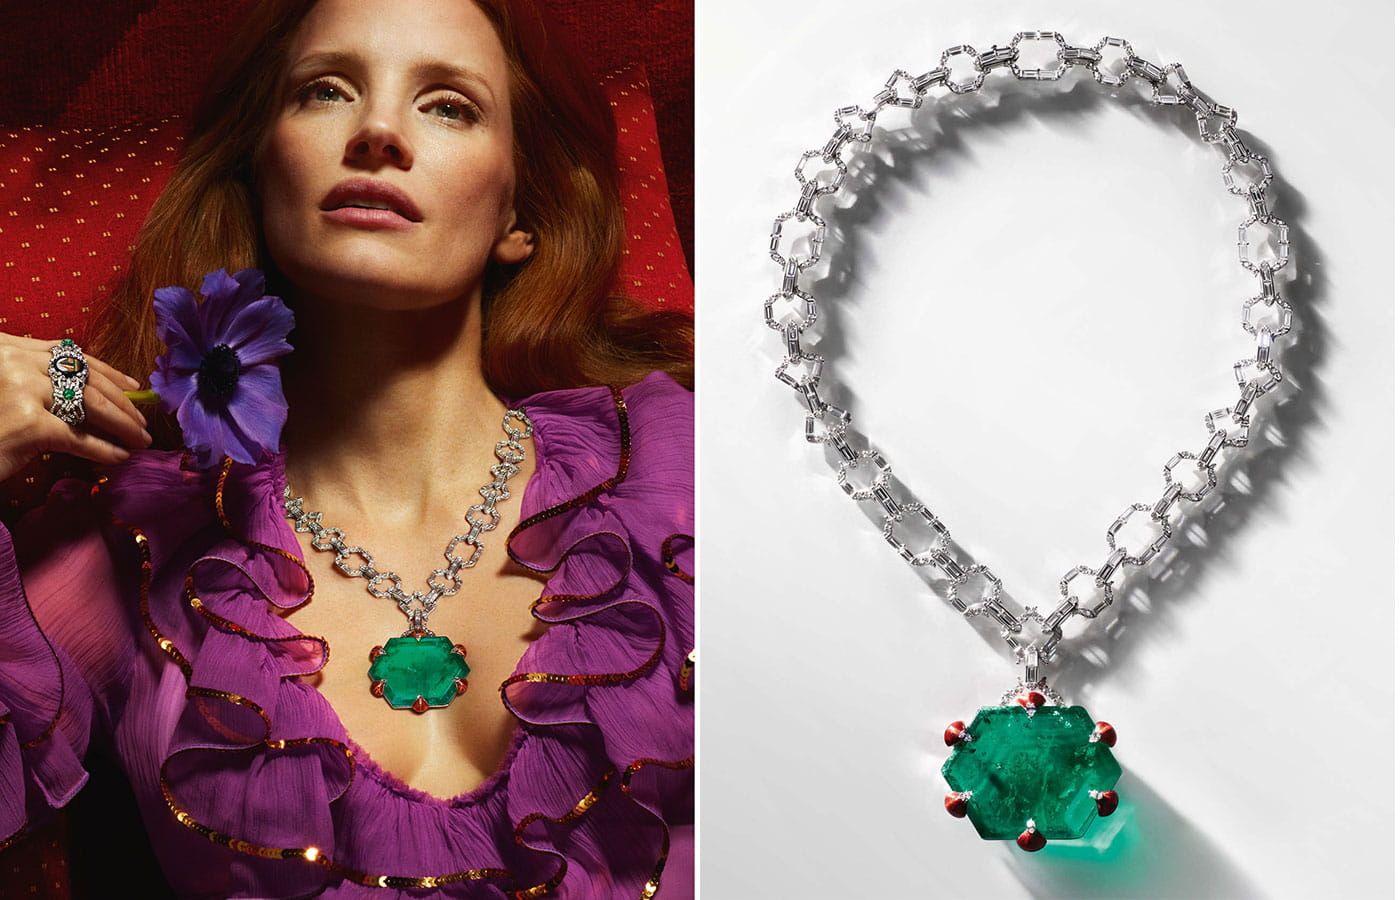 Gucci High Jewellery necklace worn by actress Jessica Chastain with a 172.41 carat hexagon-shaped emerald from the Hortus Deliciarum High Jewellery collection